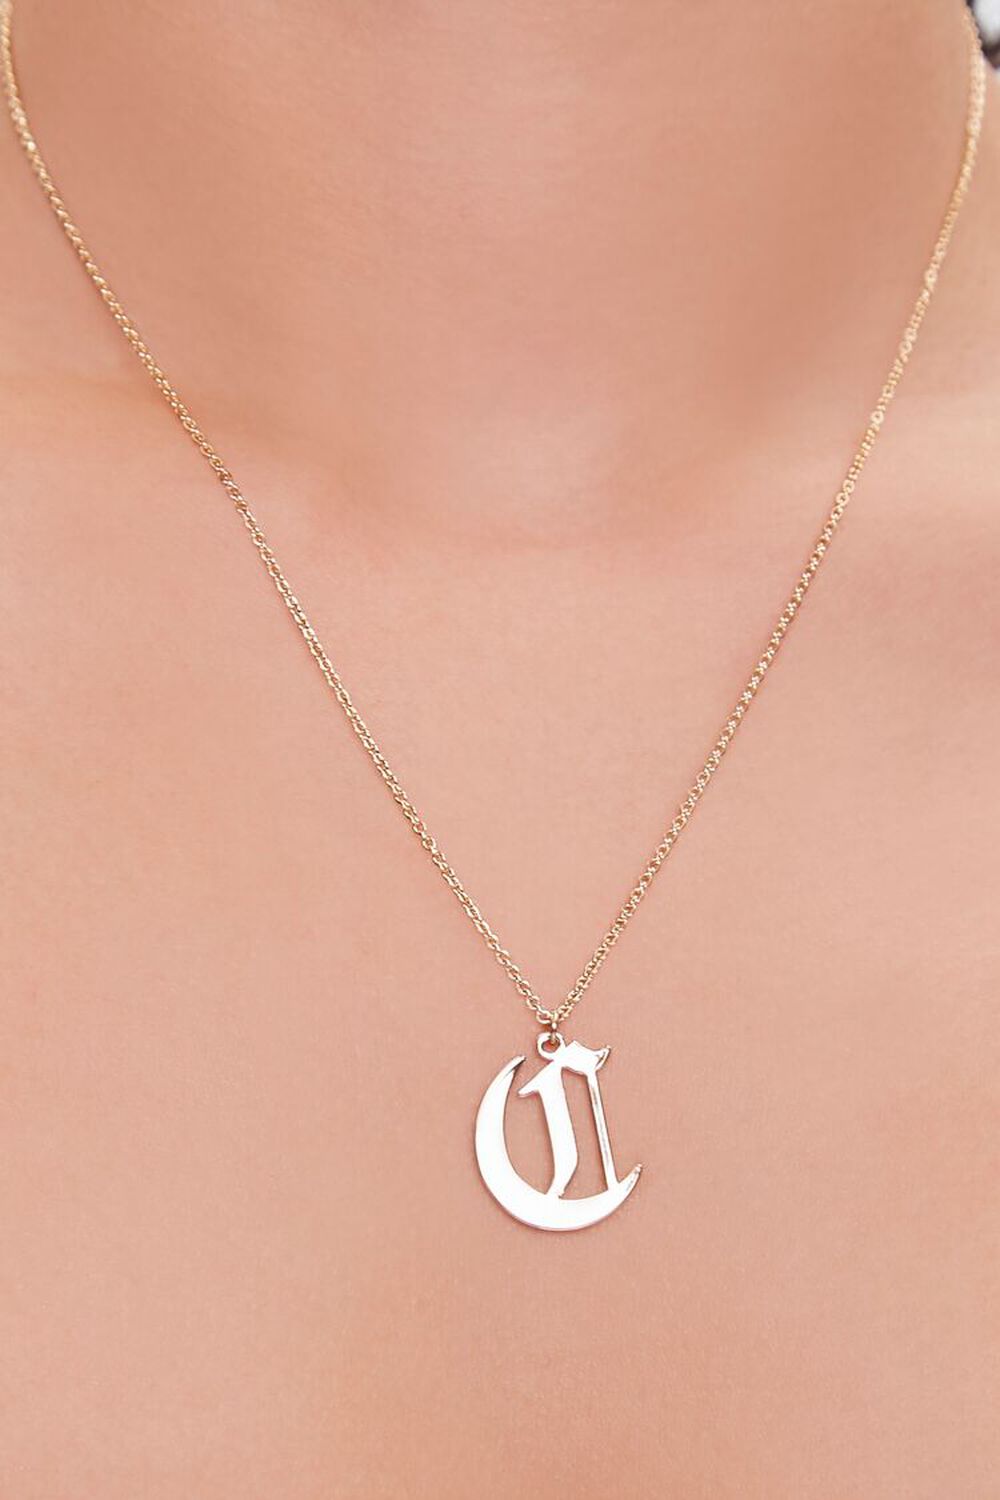 GOLD/C Initial Pendant Chain Necklace, image 1